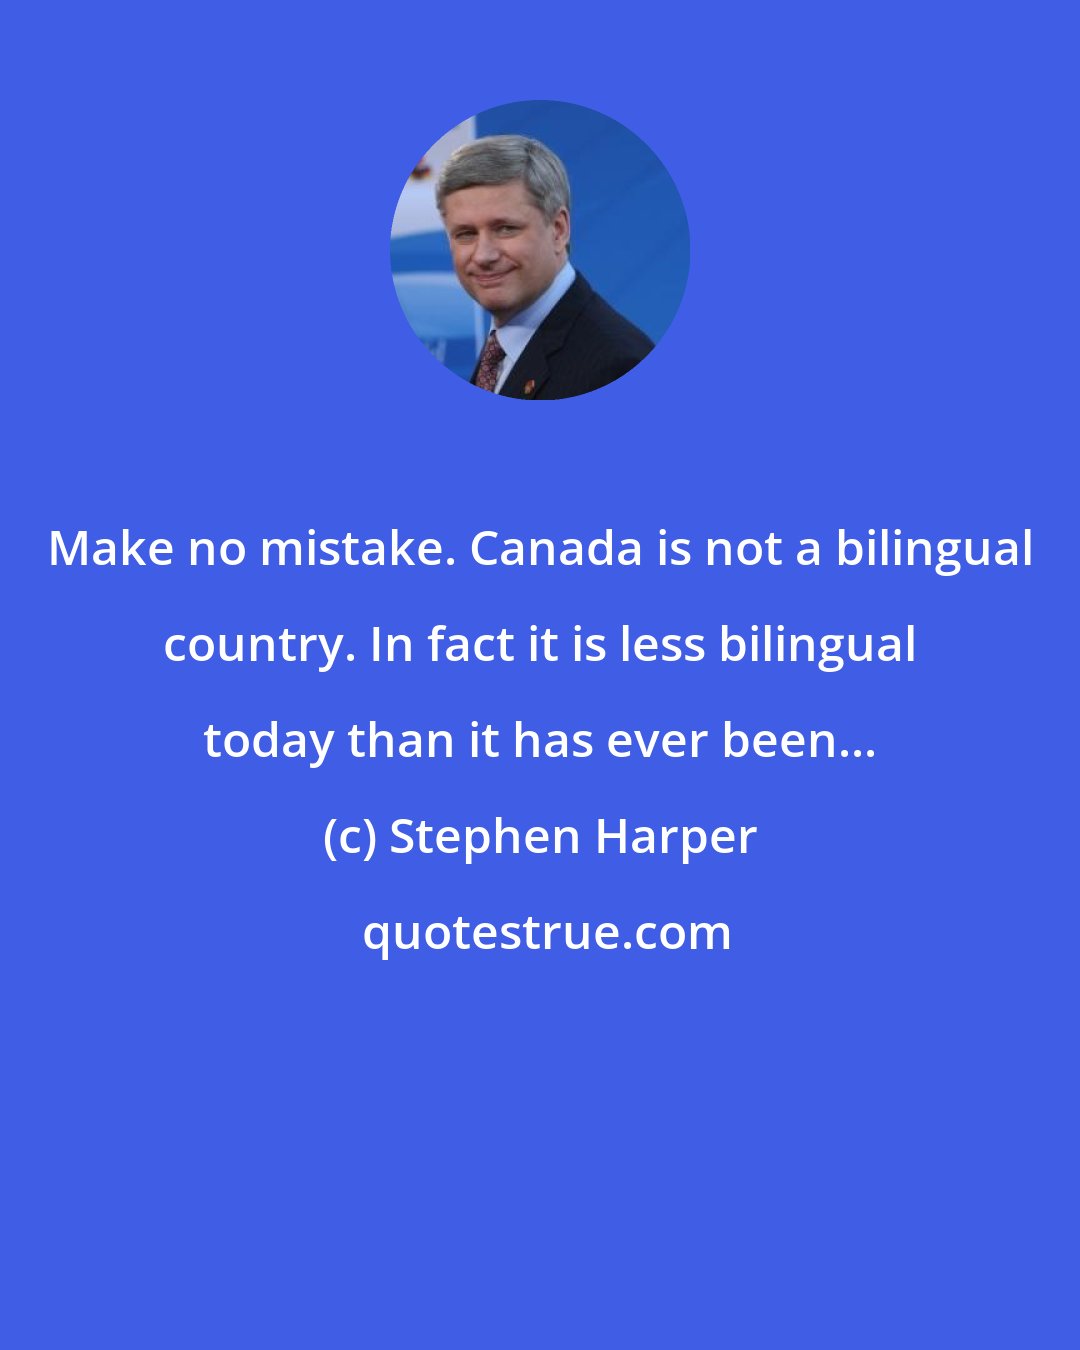 Stephen Harper: Make no mistake. Canada is not a bilingual country. In fact it is less bilingual today than it has ever been...